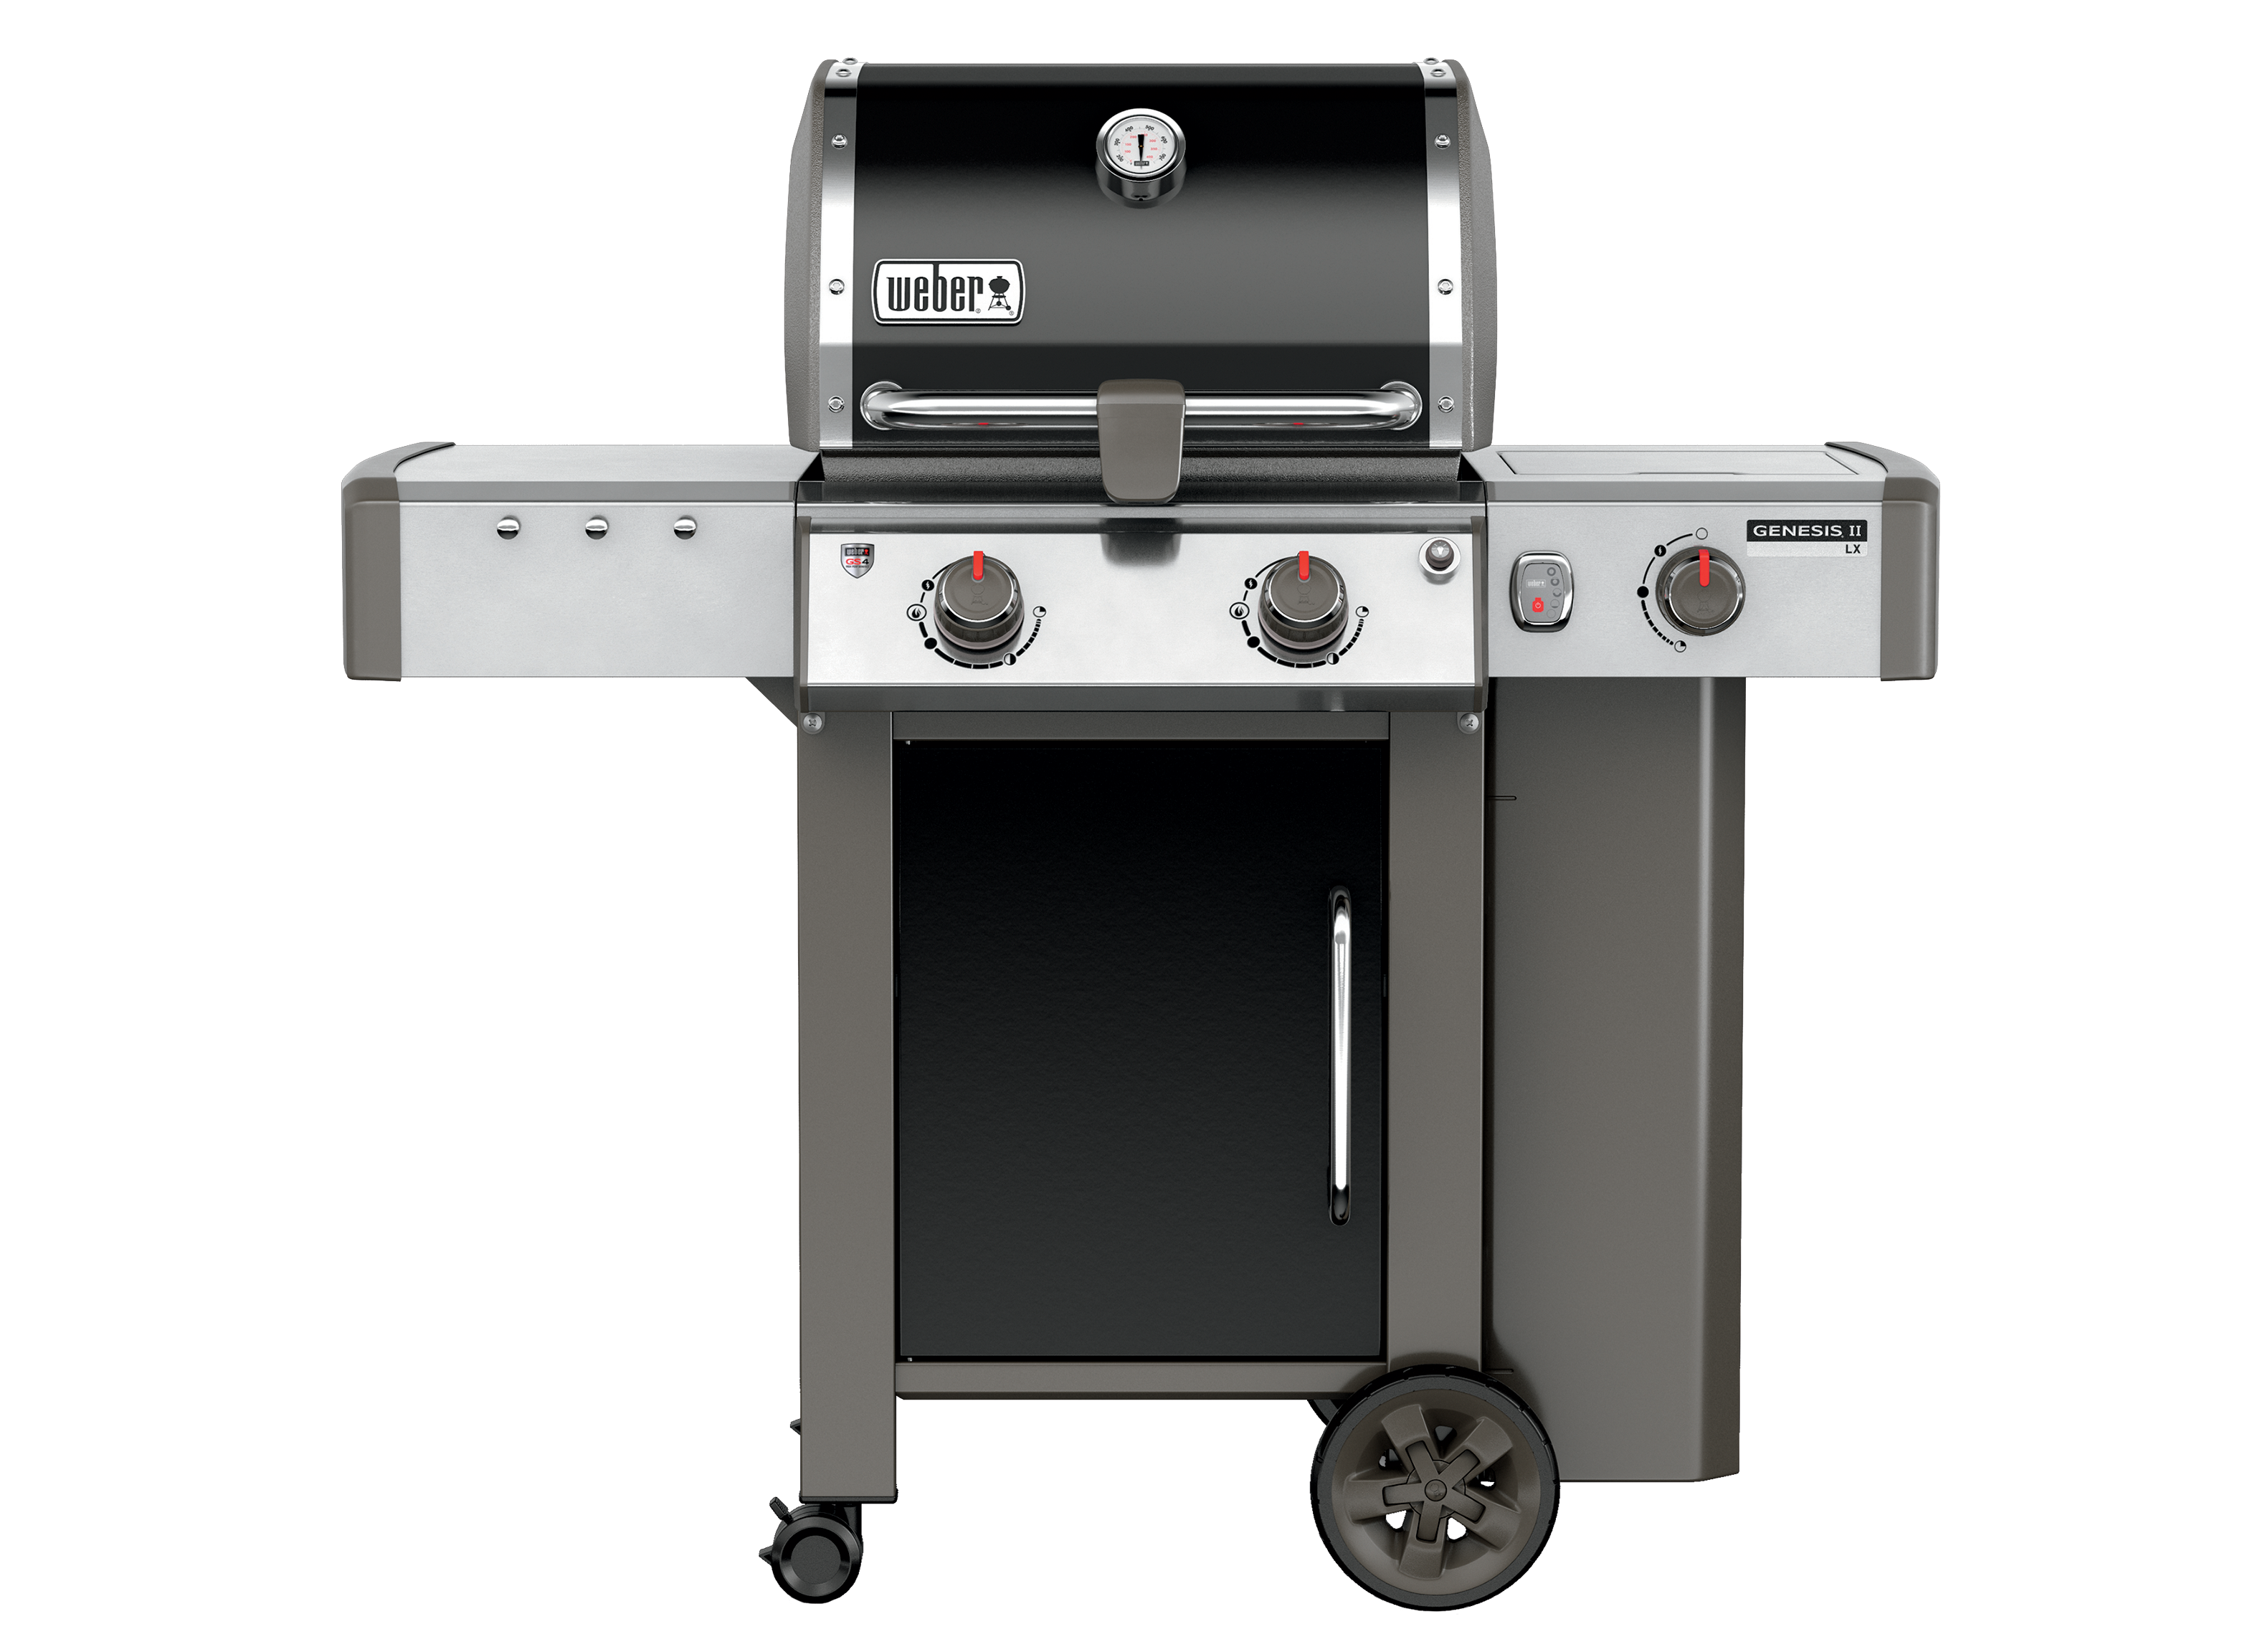 Weber Genesis II E-240 Grill Review - Consumer Reports